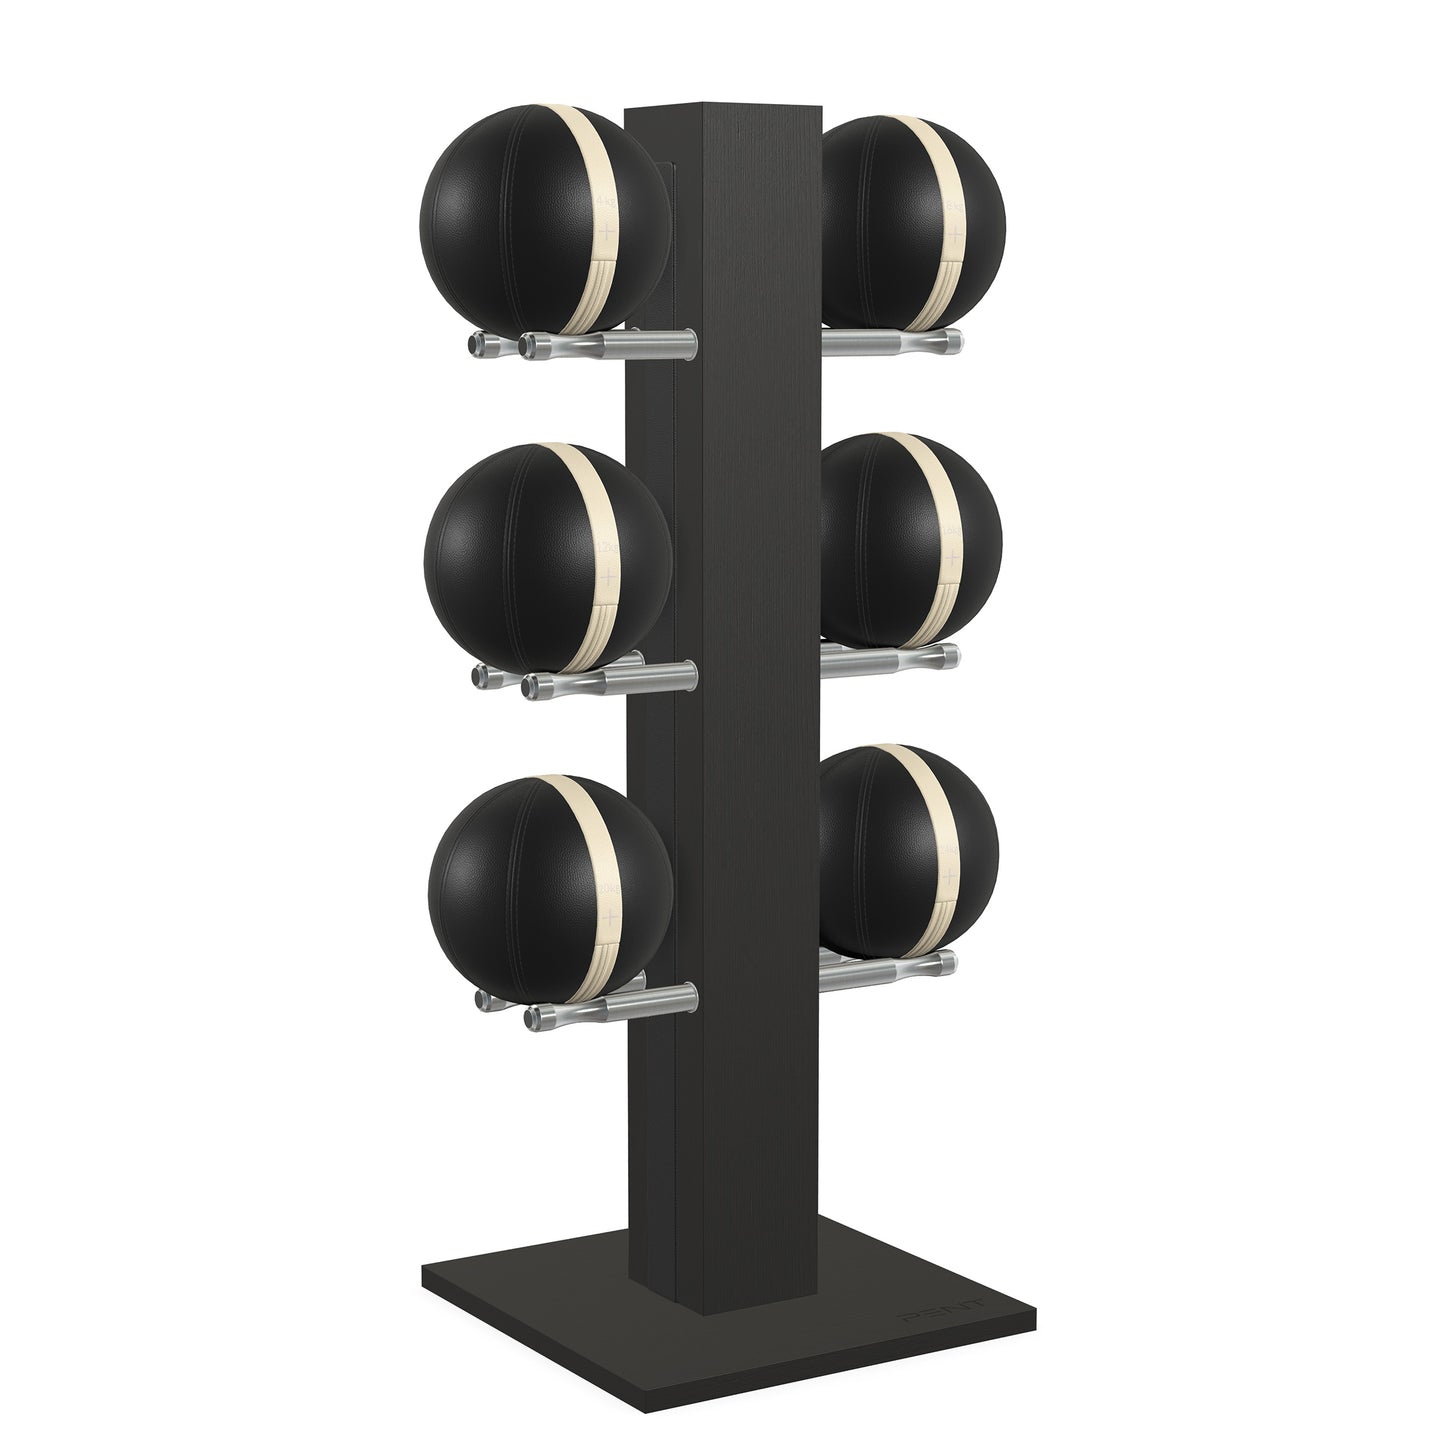 MOXA Set - Set of Leather Medicine Balls on Vertical Wooden Stand